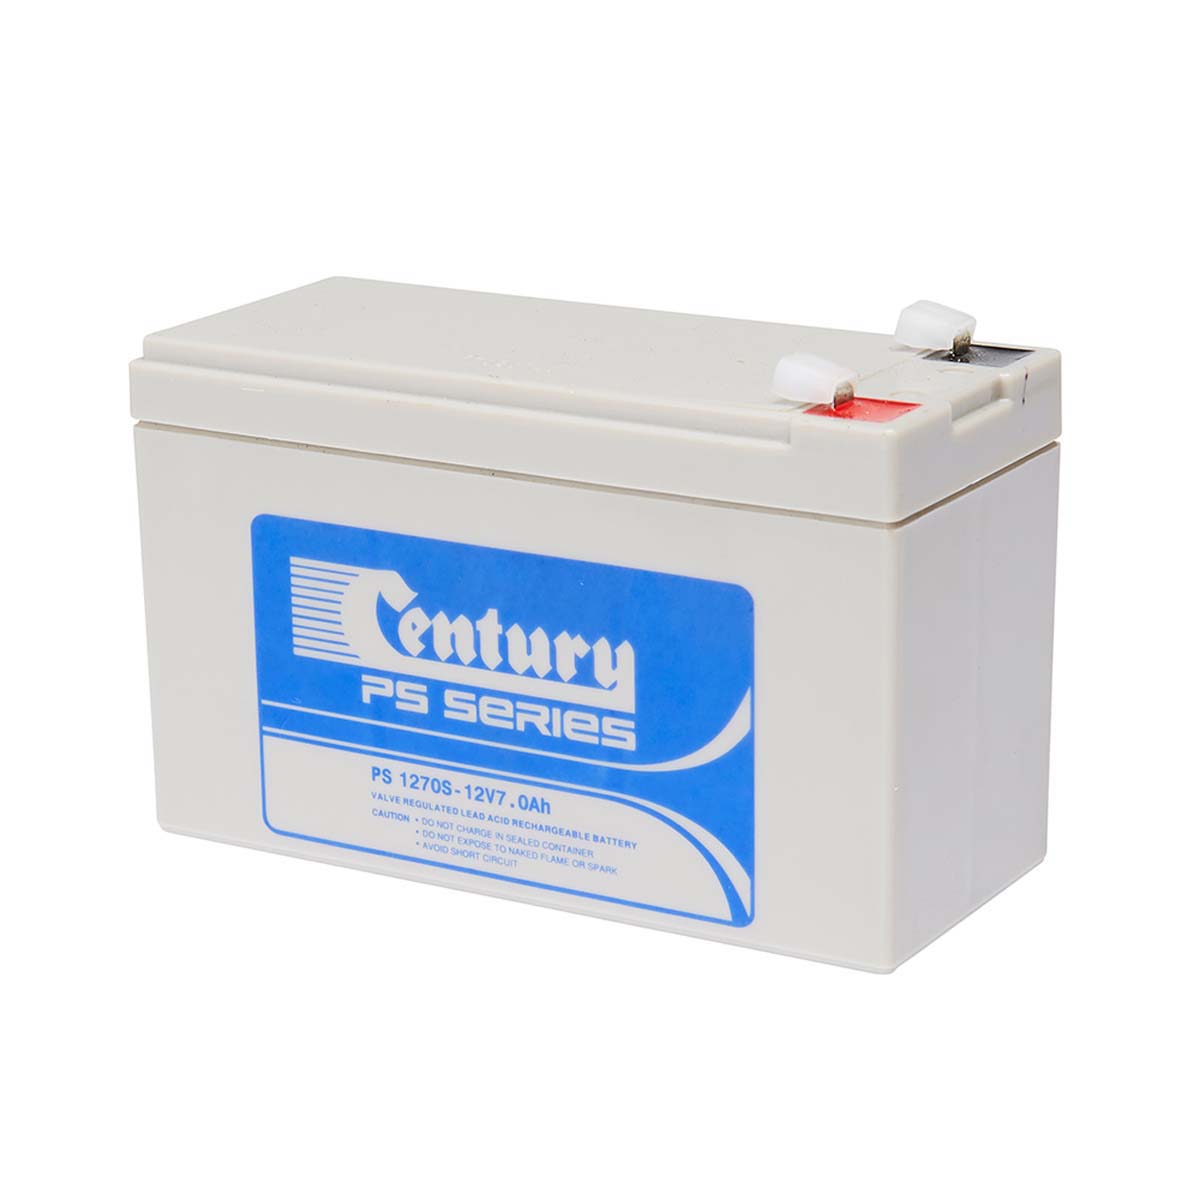 Century PS 1270 Rechargeable Battery 12V 7AH